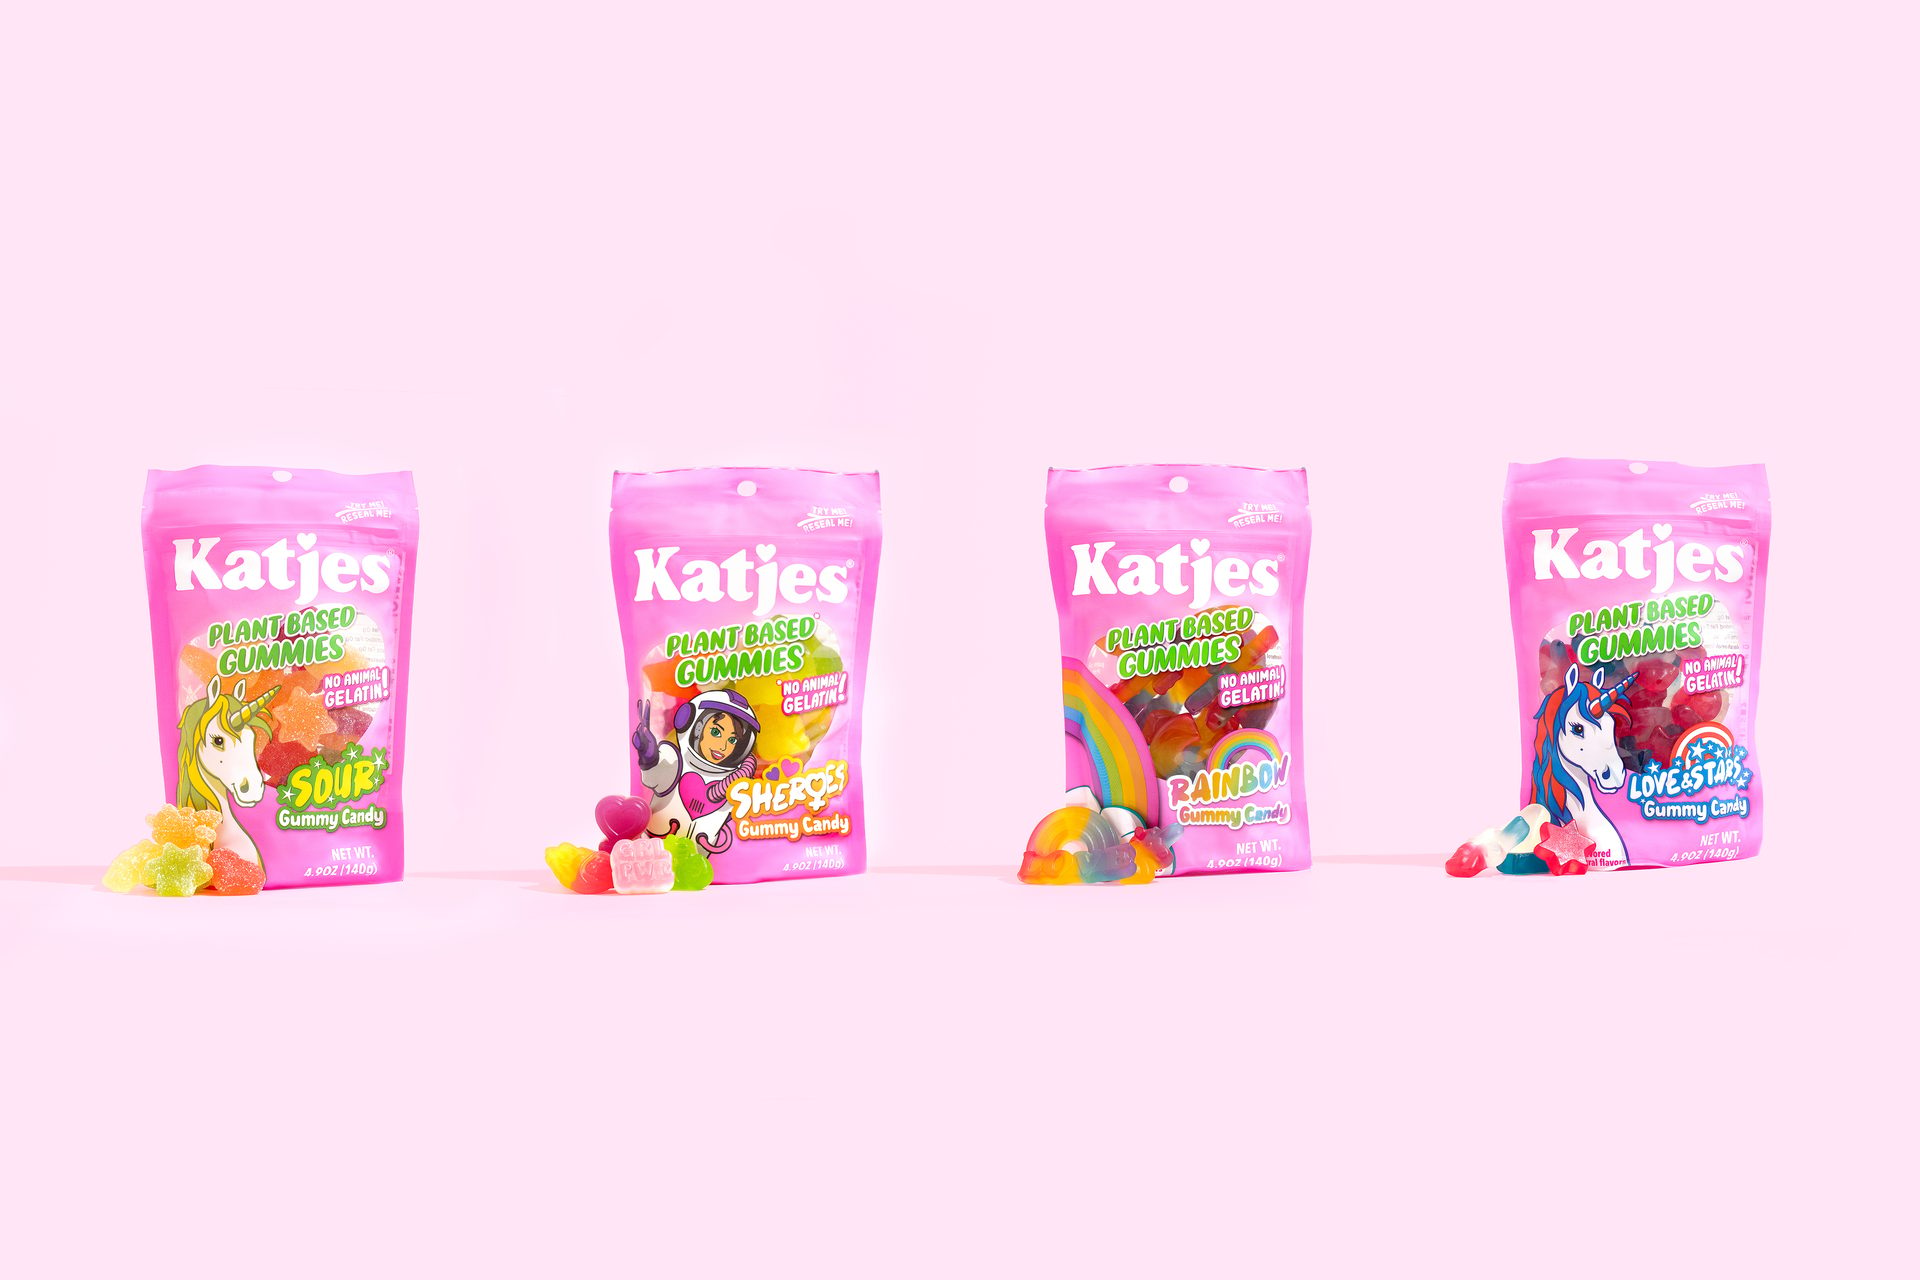 Gummy candy, Packages, Pink, Pouches